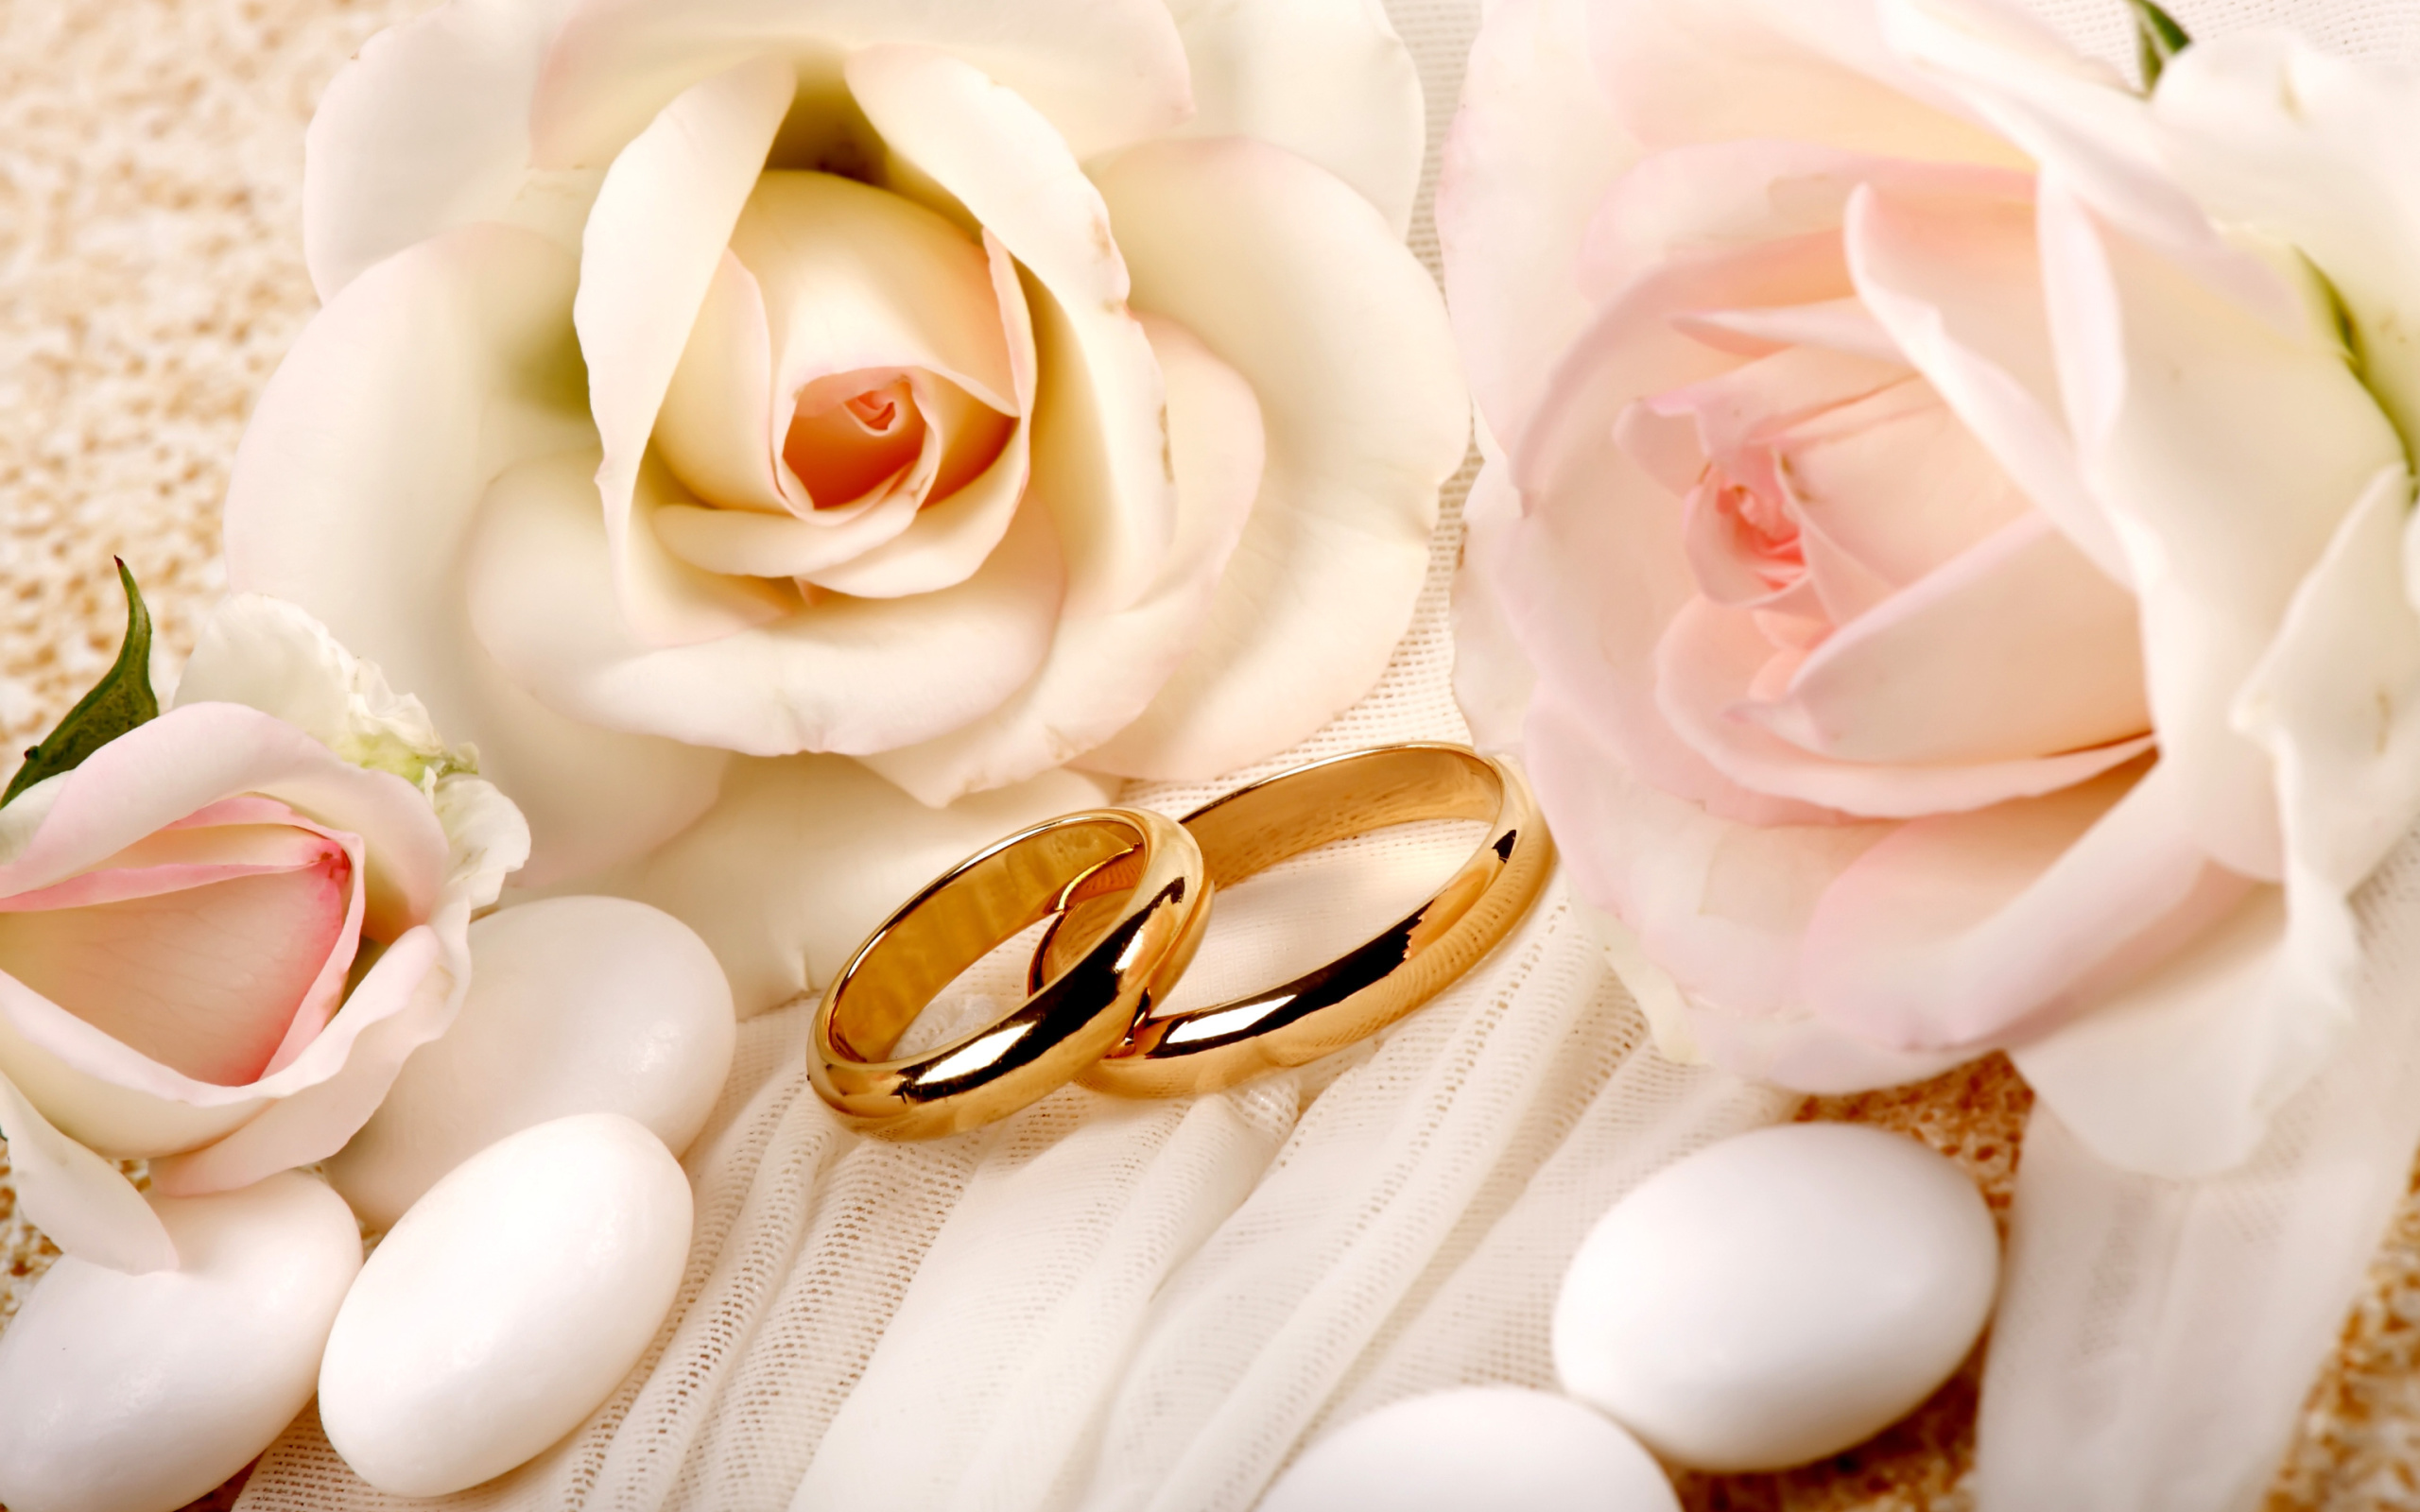 Das Roses and Wedding Rings Wallpaper 2560x1600